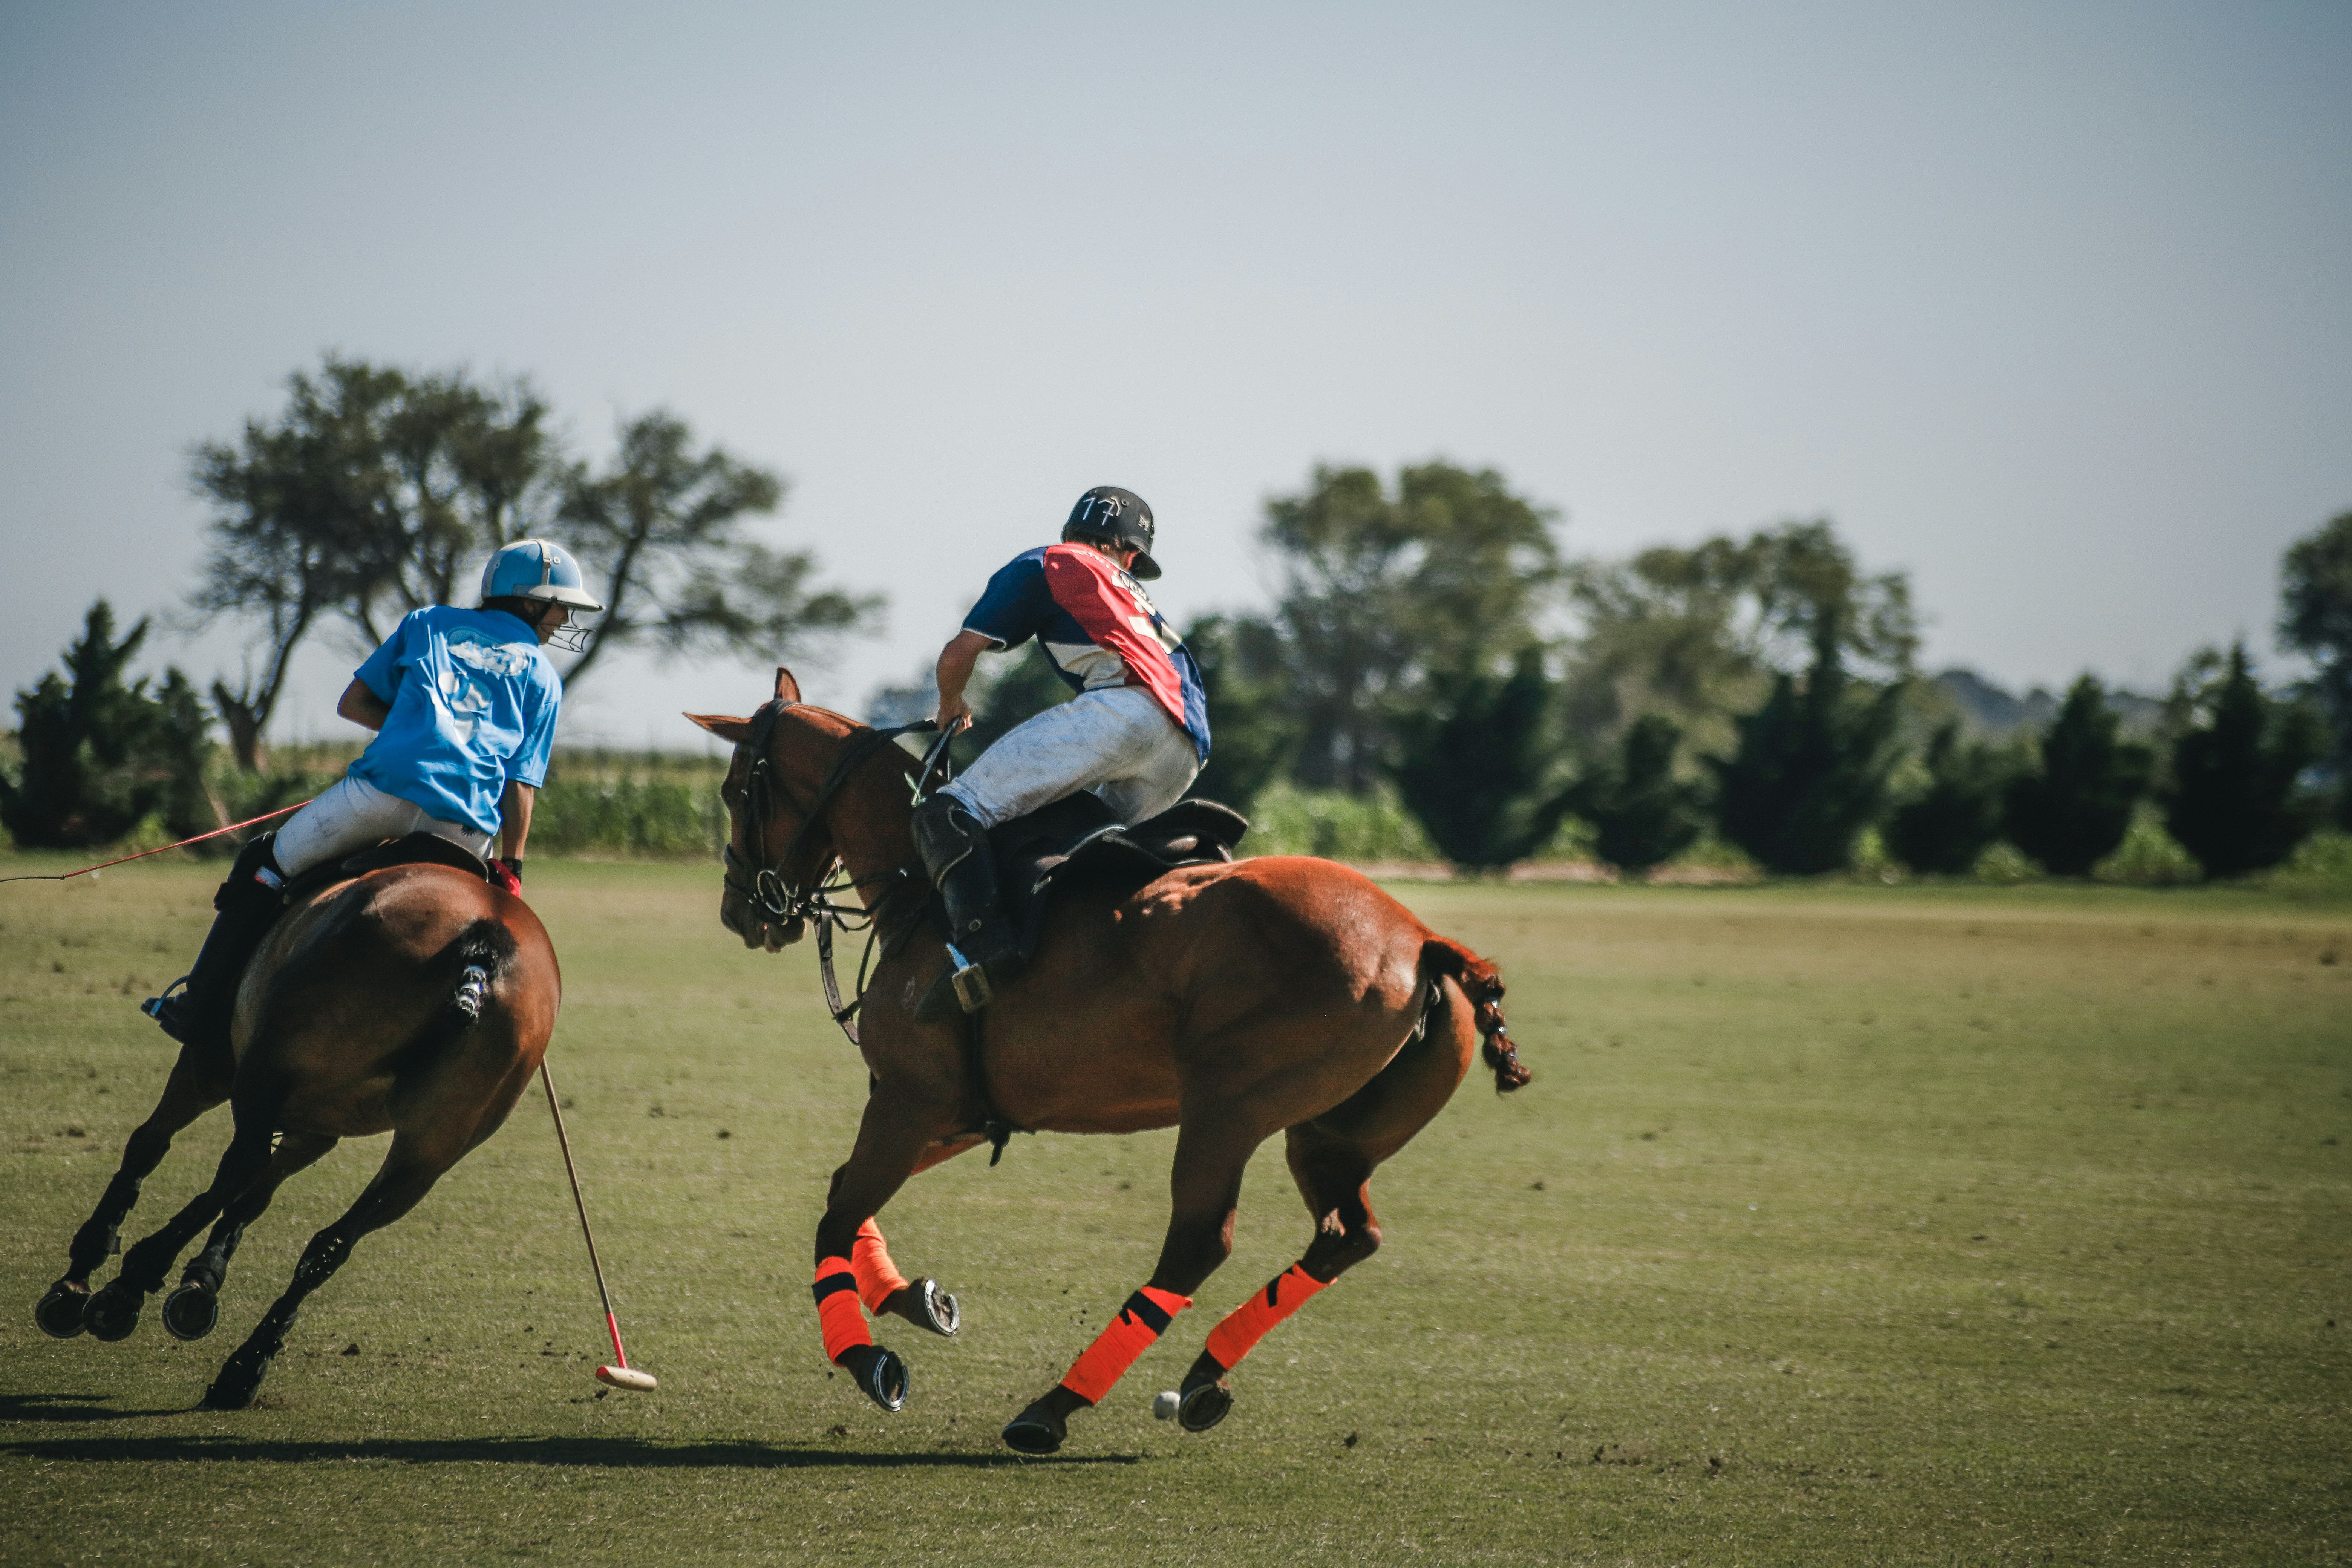 2 men riding horses on green grass field during daytime